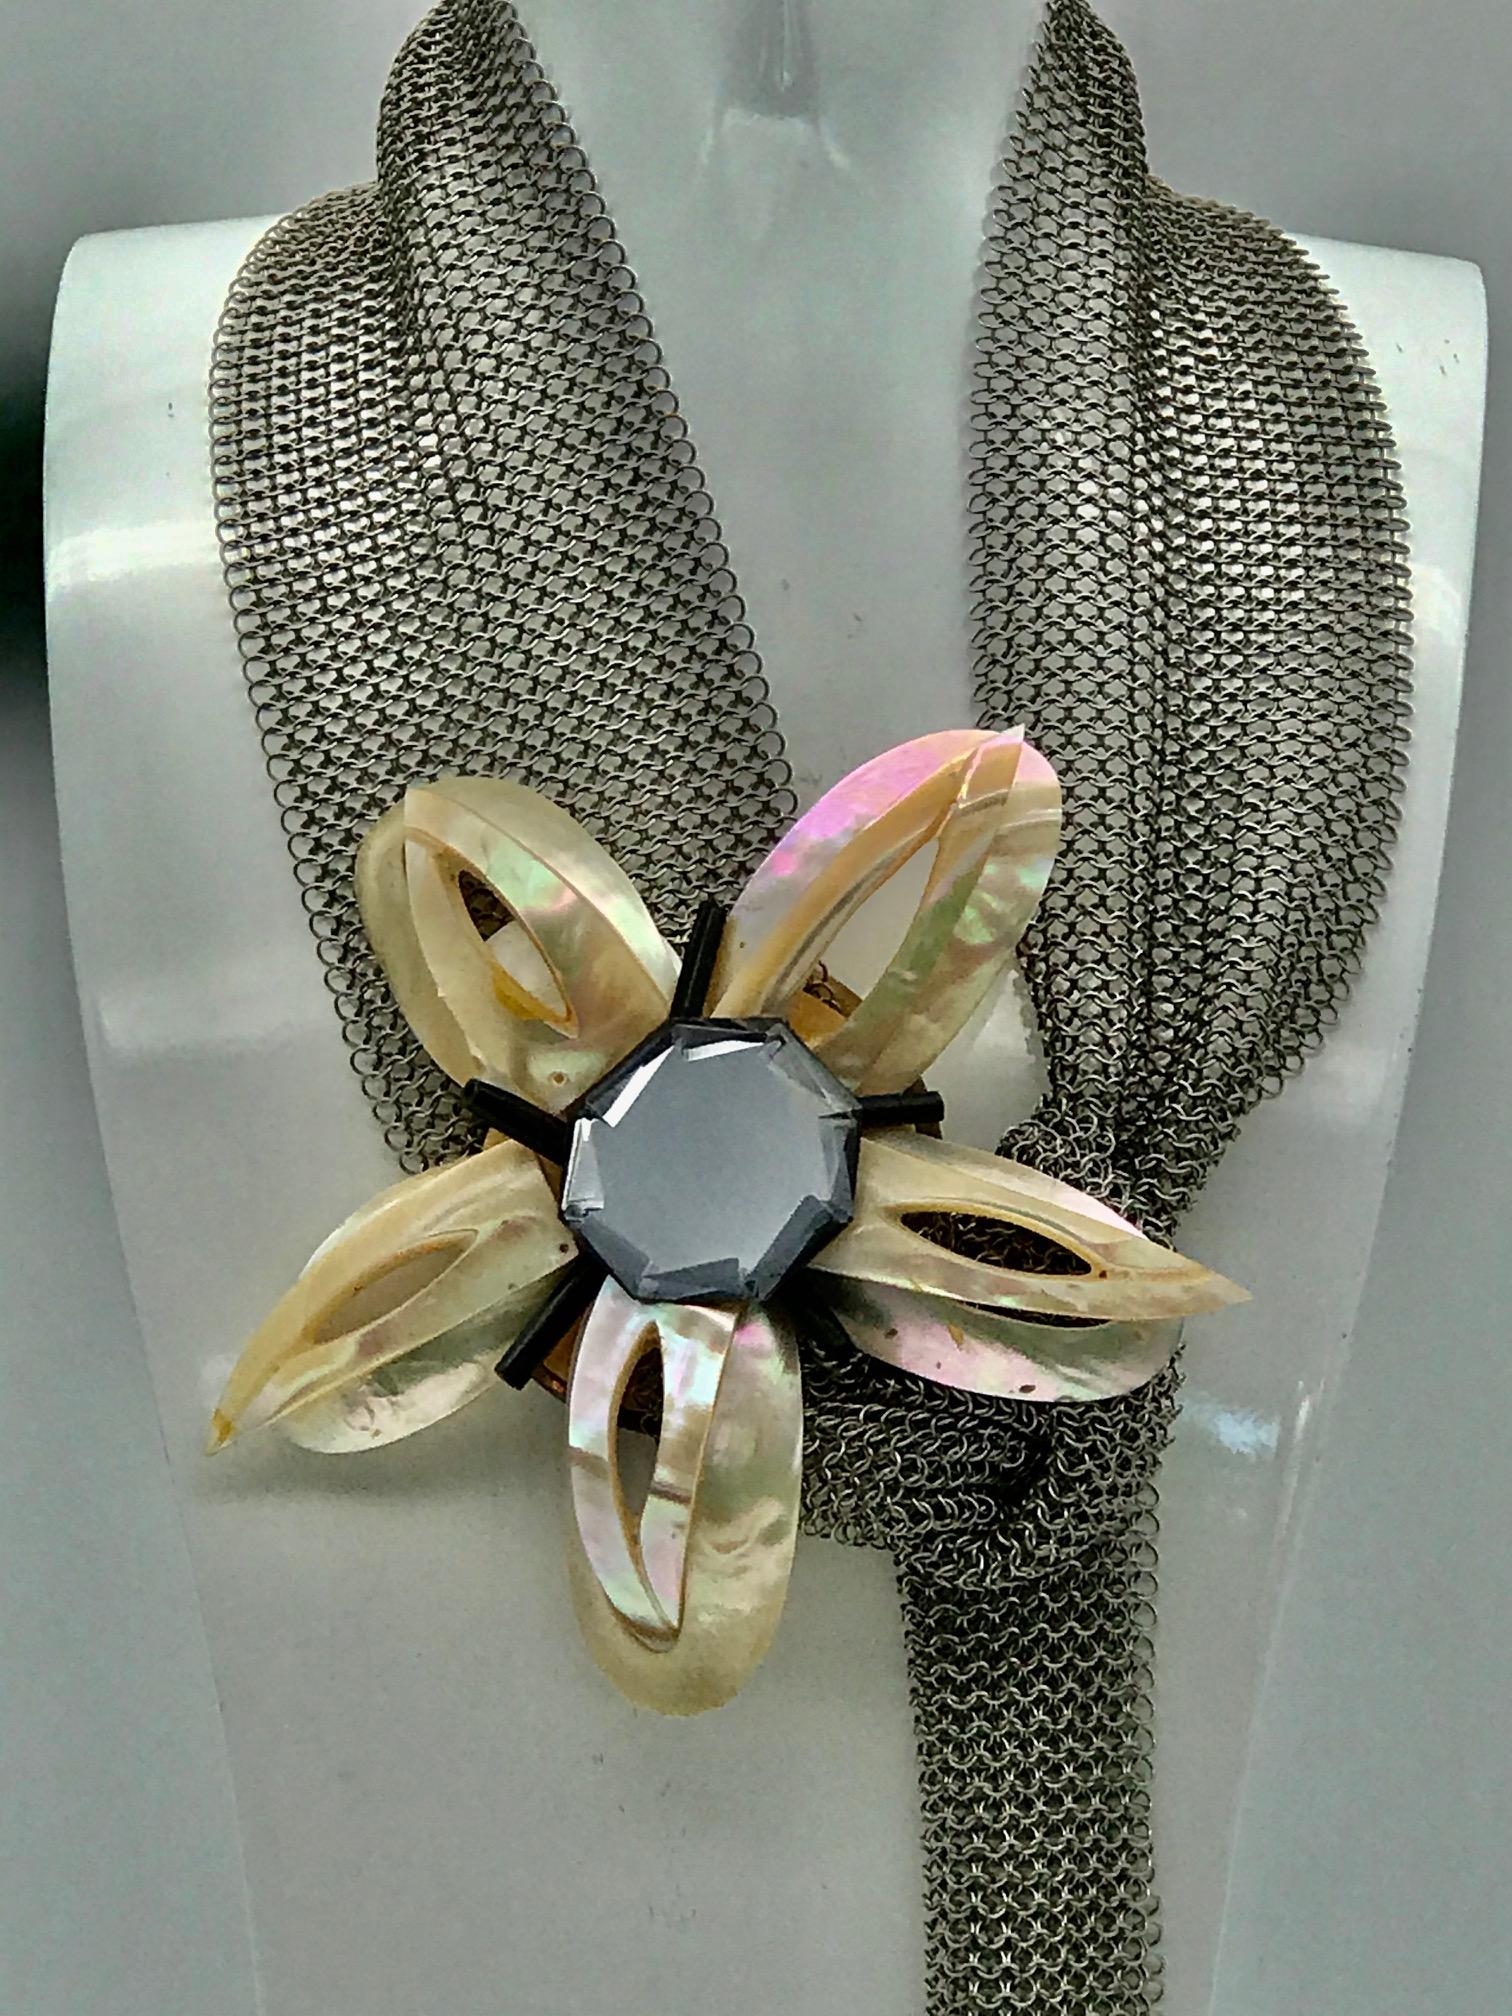 
This Belt/Necklace  from iridescent pink nacre /Turbo Marmoratus shell  has been up-cycled from hand cut and polished pieces, produced during the French Deco period. The forms of the Necklace/Belt are convex parts of the Turbo shell cut as petals,